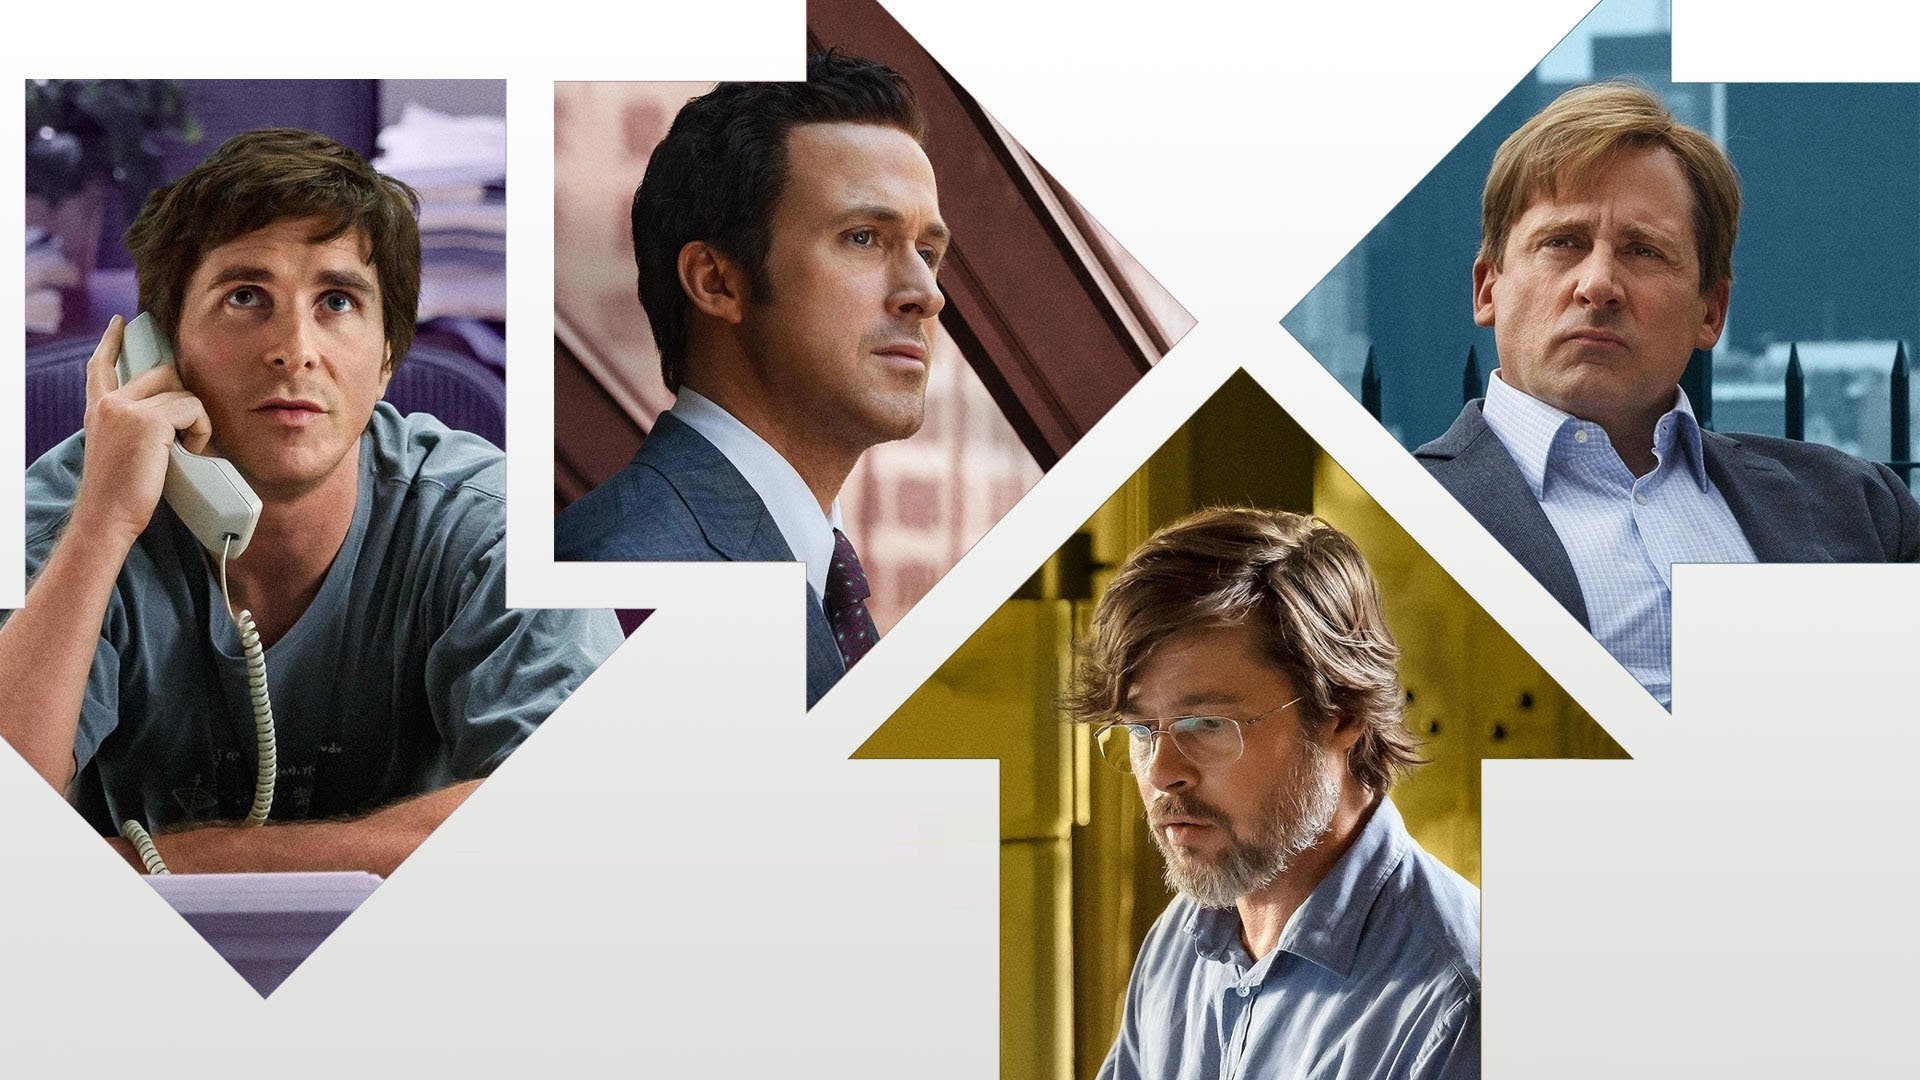 The Big Short, HD wallpapers, Background images, 1920x1080 Full HD Desktop